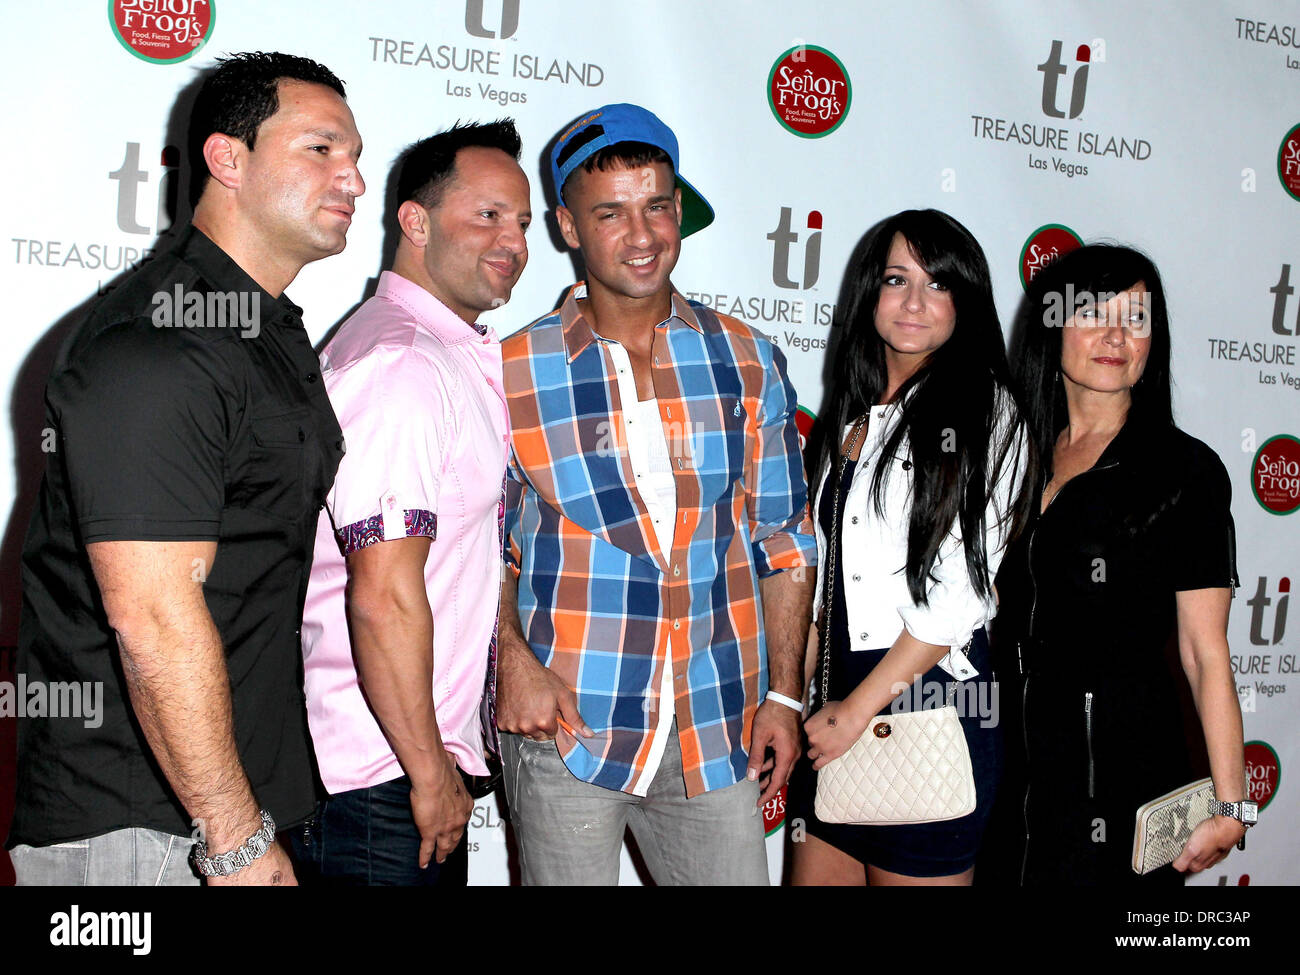 Mike 'The Situation' Sorrentino and his family Mike 'The Situation' Sorrentino celebrates his 30th birthday at Senor Frog's Las Vegas, Nevada - 14.07.12 Stock Photo